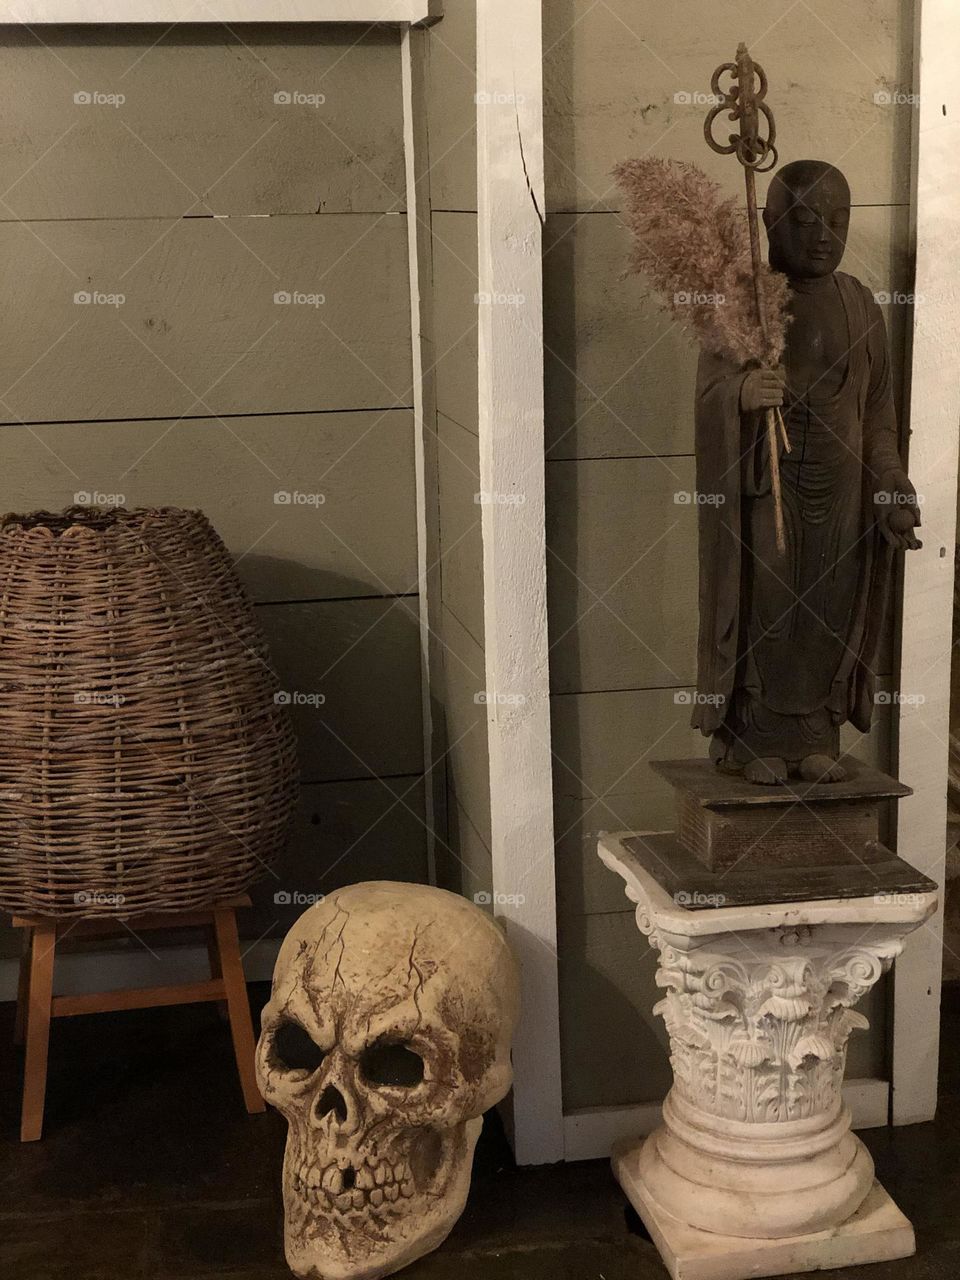 Skull in the corner, decorating for Halloween, realistic skull decoration, skull decor in your home, staying at a Bed and Breakfast Inn, creepy decorations 